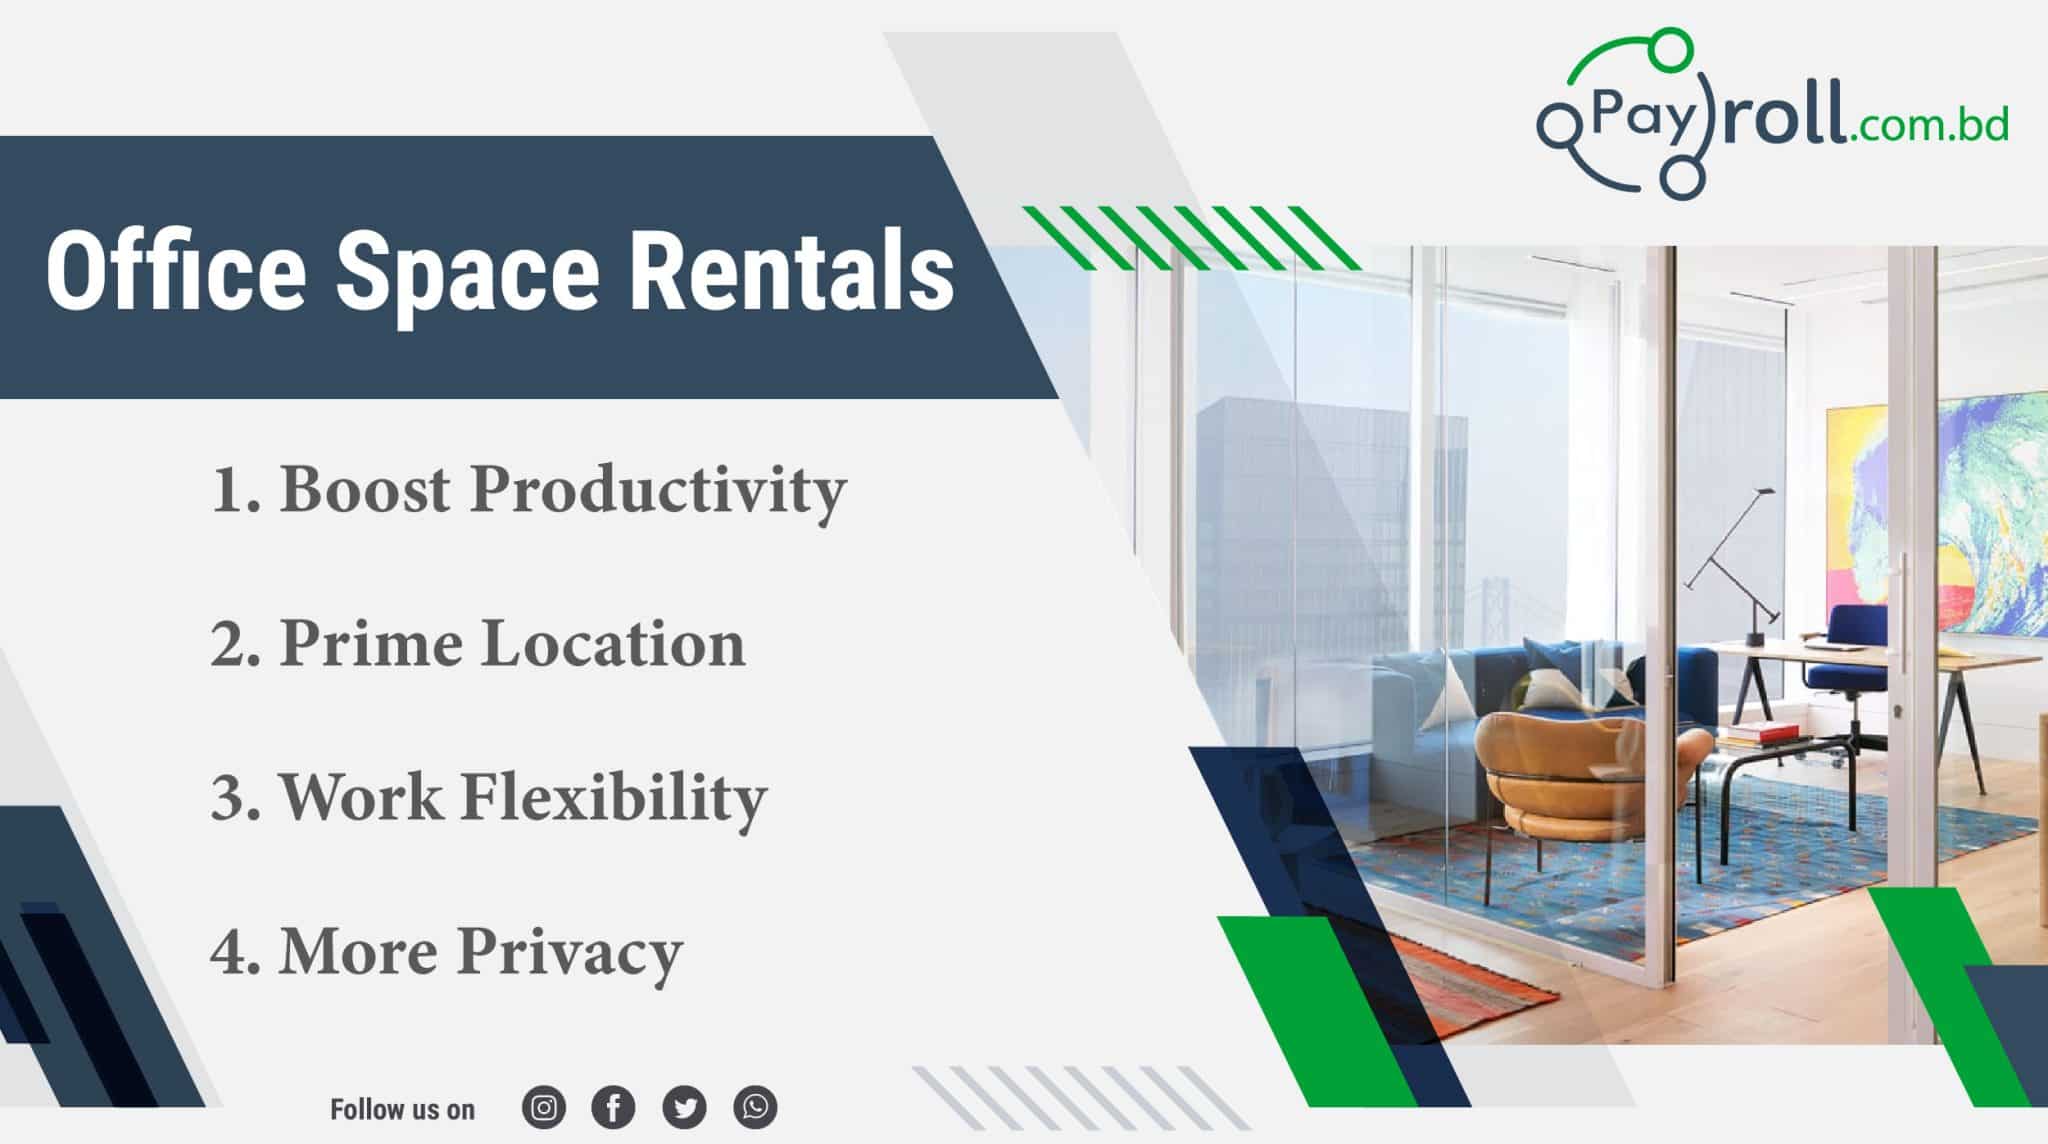 Payroll-Office-Space-Rentals